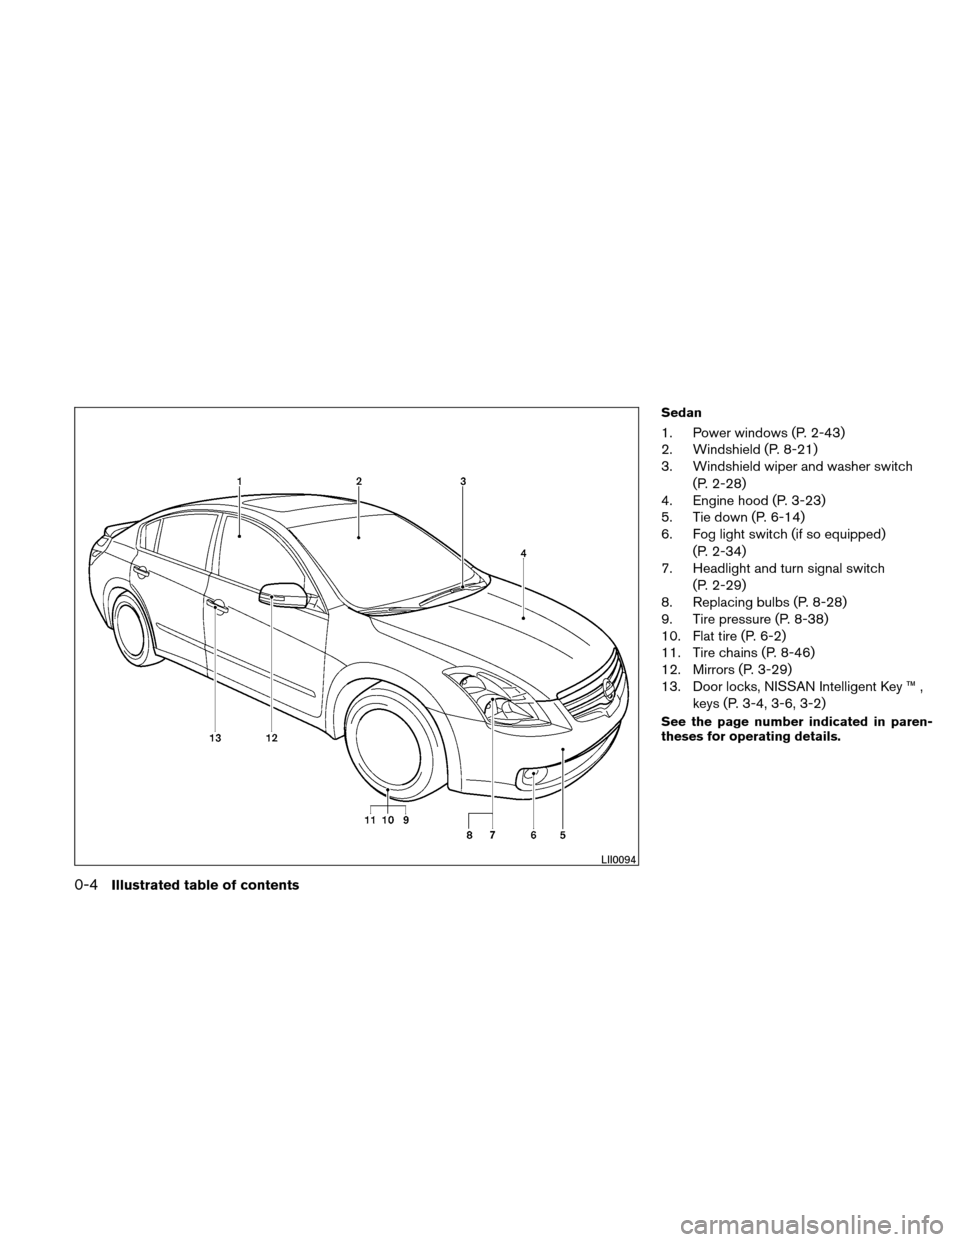 NISSAN ALTIMA COUPE 2011 D32 / 4.G User Guide Sedan
1. Power windows (P. 2-43)
2. Windshield (P. 8-21)
3. Windshield wiper and washer switch(P. 2-28)
4. Engine hood (P. 3-23)
5. Tie down (P. 6-14)
6. Fog light switch (if so equipped)
(P. 2-34)
7.